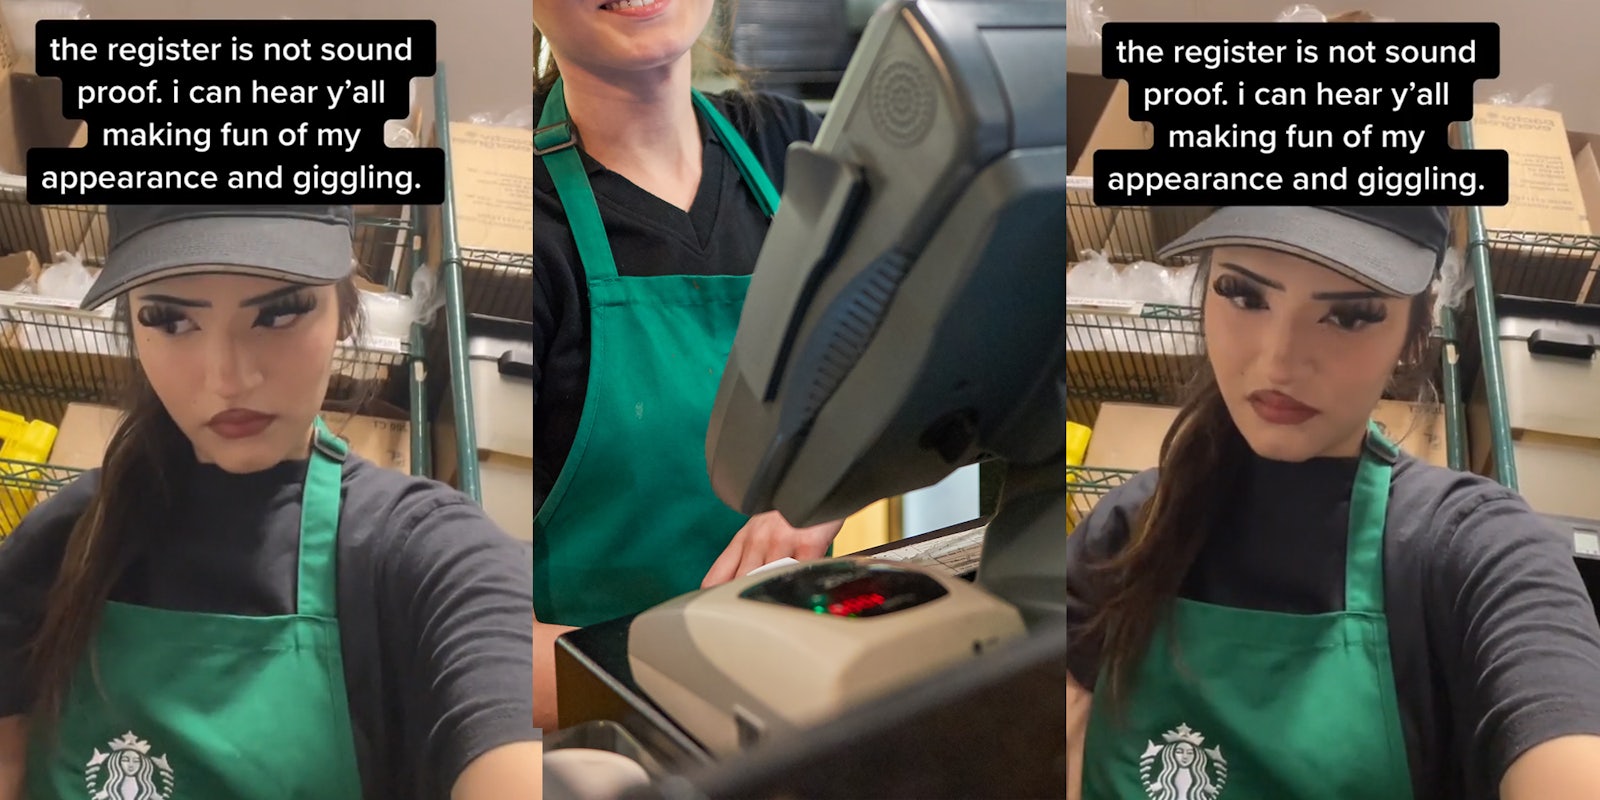 Starbucks employee with caption 'the register is not sound proof. i can hear y'all making fun of my appearance and giggling' (l) Starbucks employee at register (c) Starbucks employee with caption 'the register is not sound proof. i can hear y'all making fun of my appearance and giggling' (r)